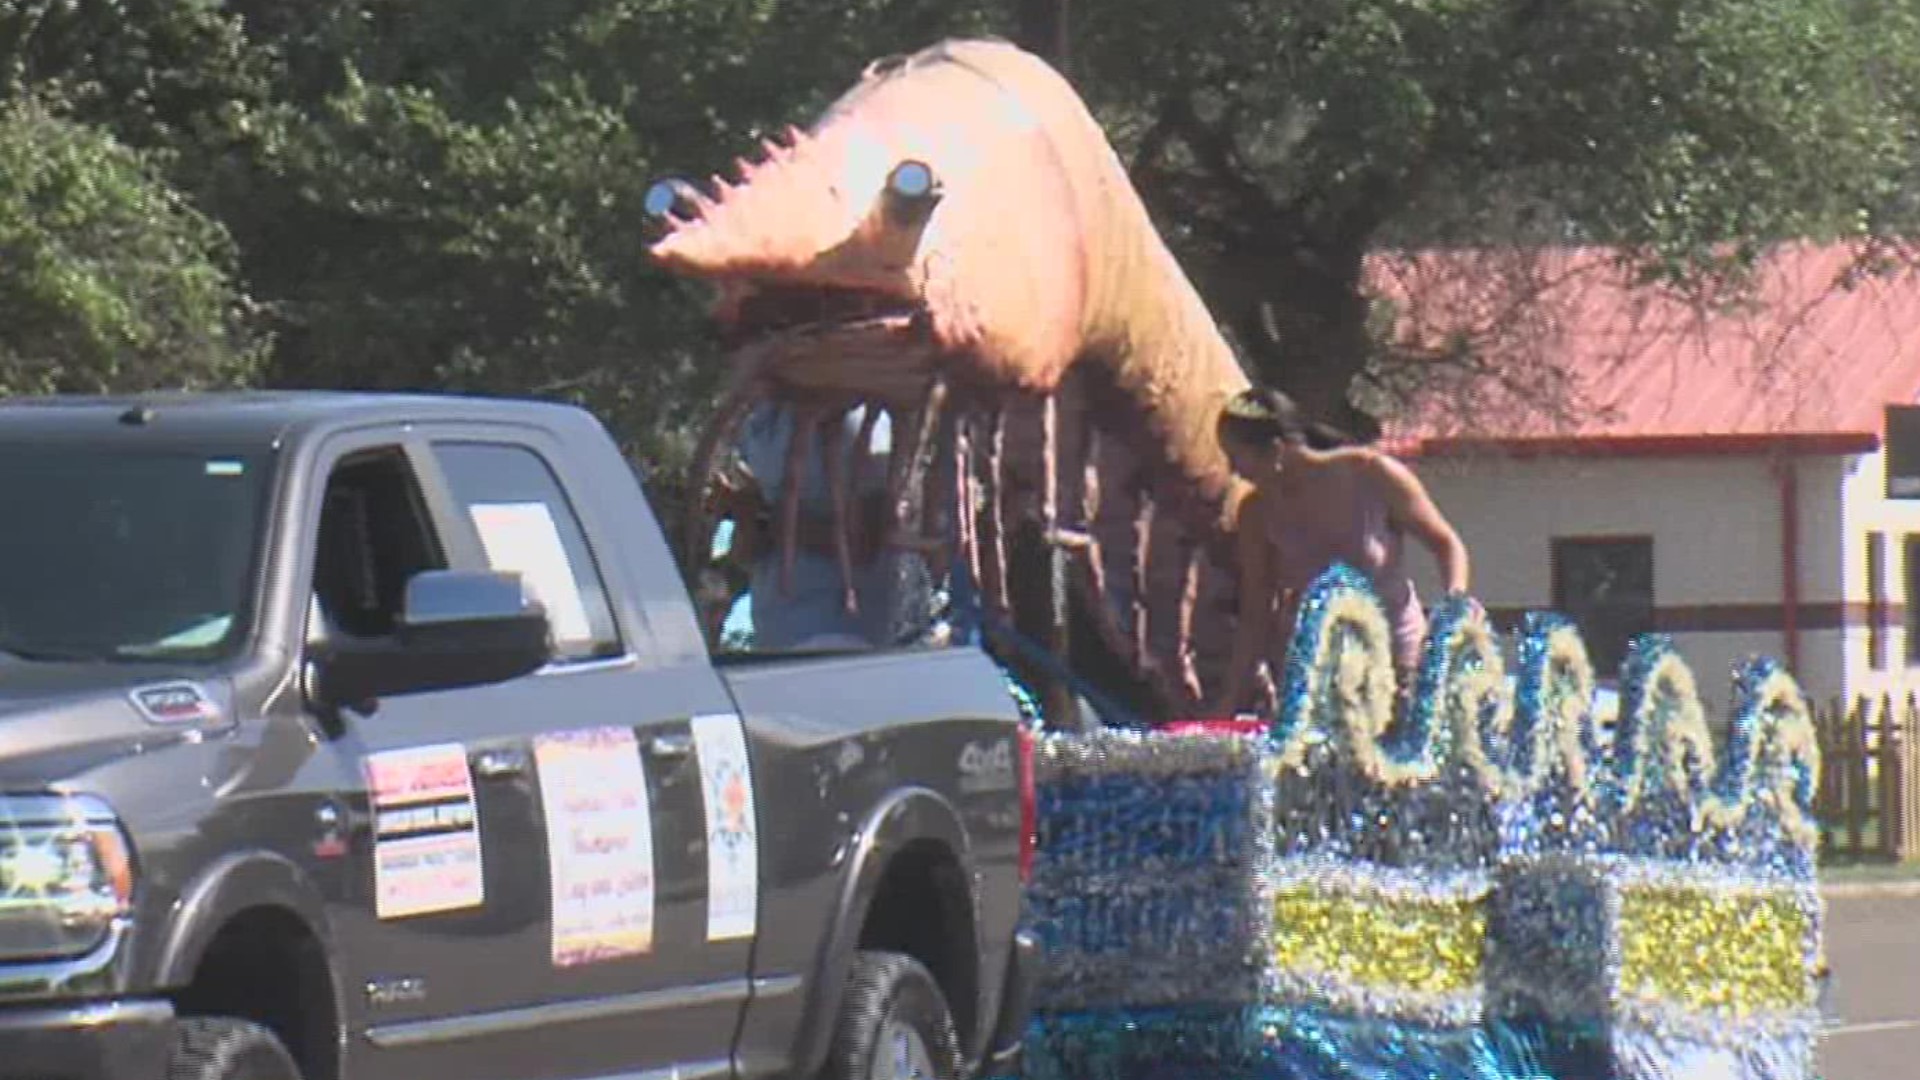 Shrimporee is back in Aransas Pass for its 74th year of festivities